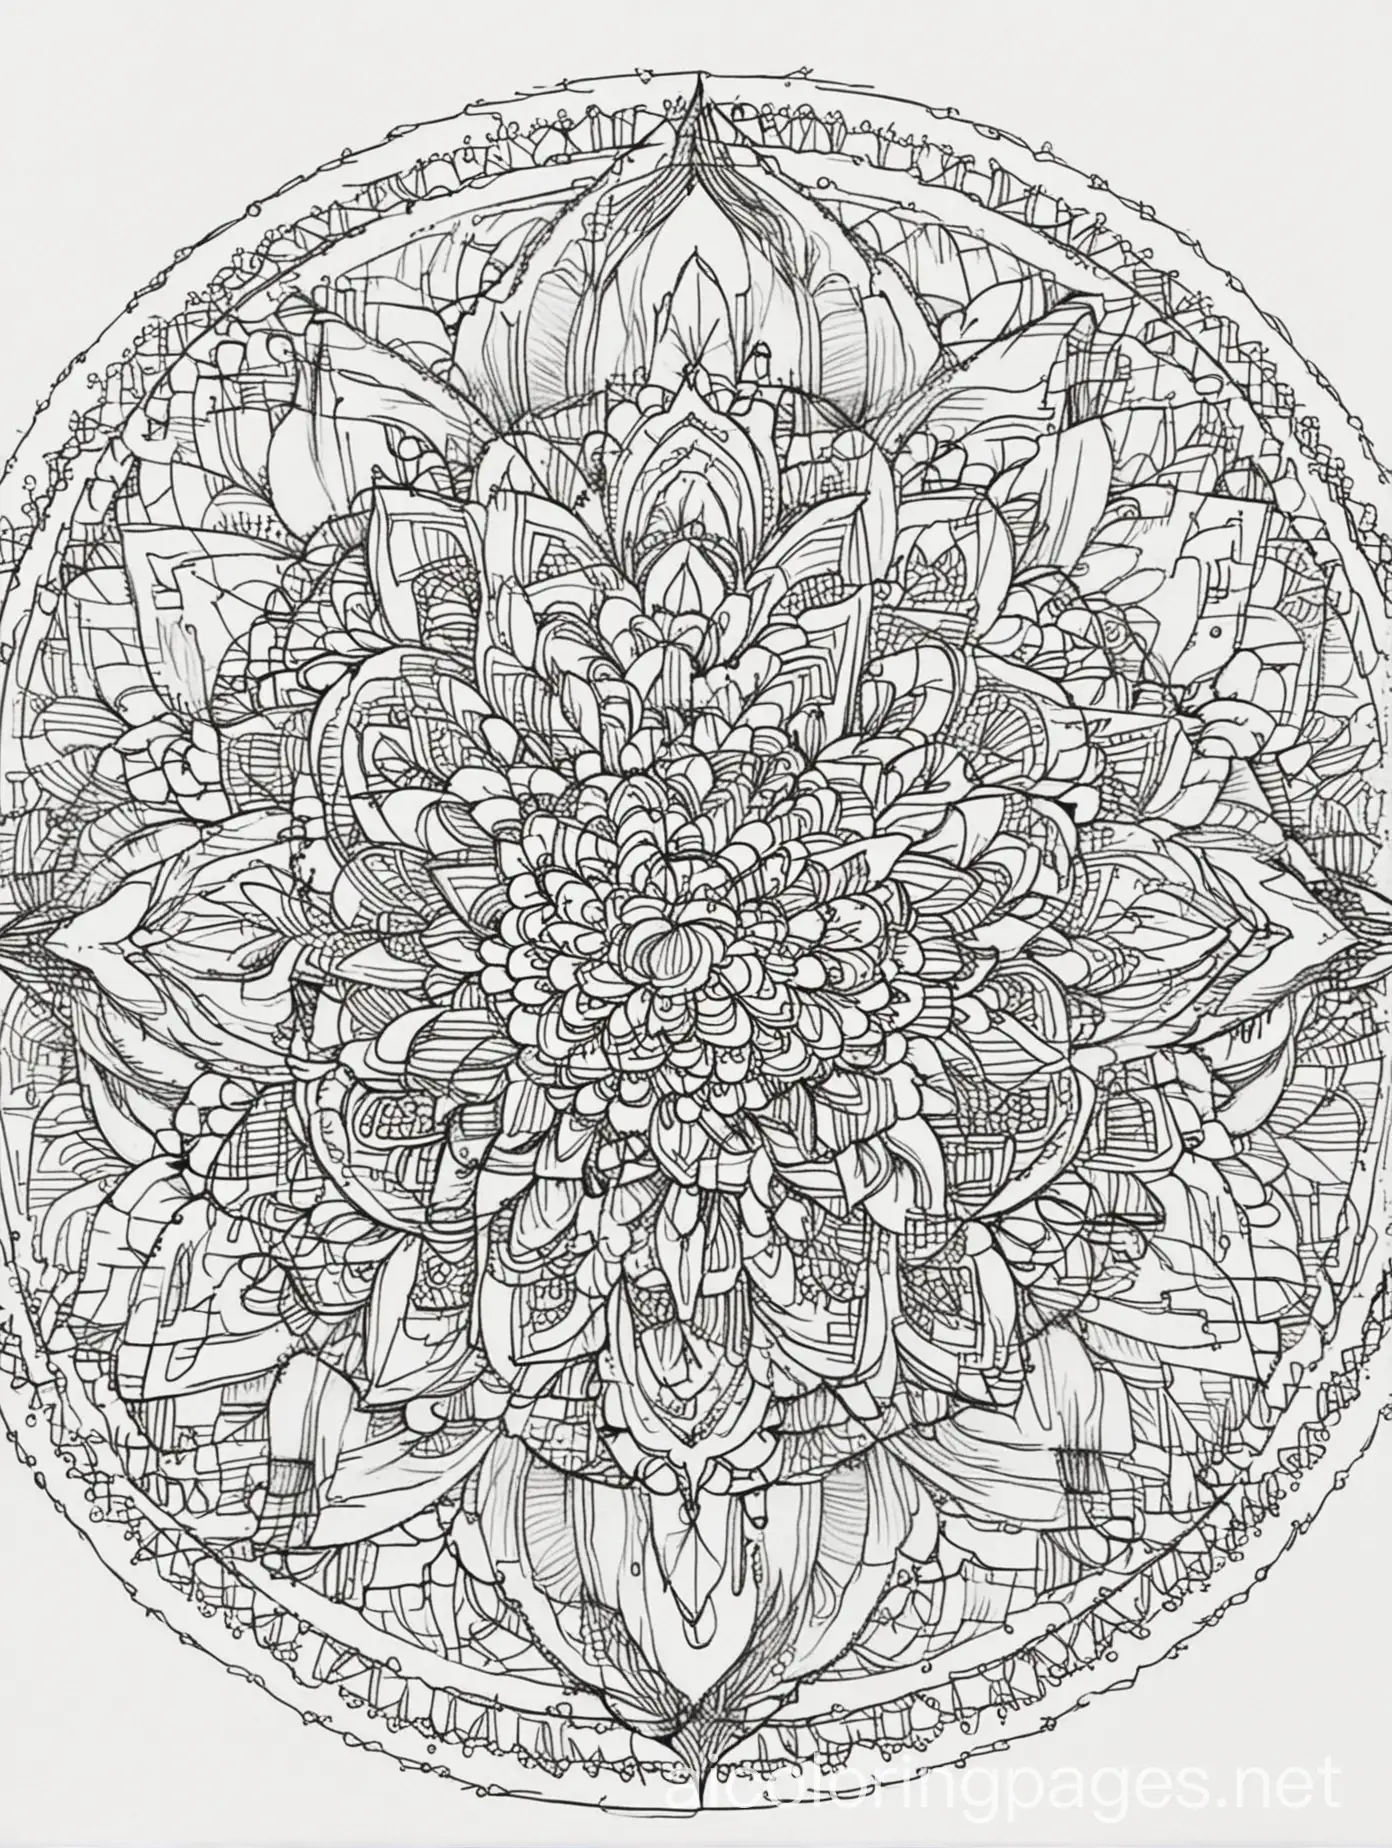 mandala
, Coloring Page, black and white, line art, white background, Simplicity, Ample White Space. The background of the coloring page is plain white to make it easy for young children to color within the lines. The outlines of all the subjects are easy to distinguish, making it simple for kids to color without too much difficulty